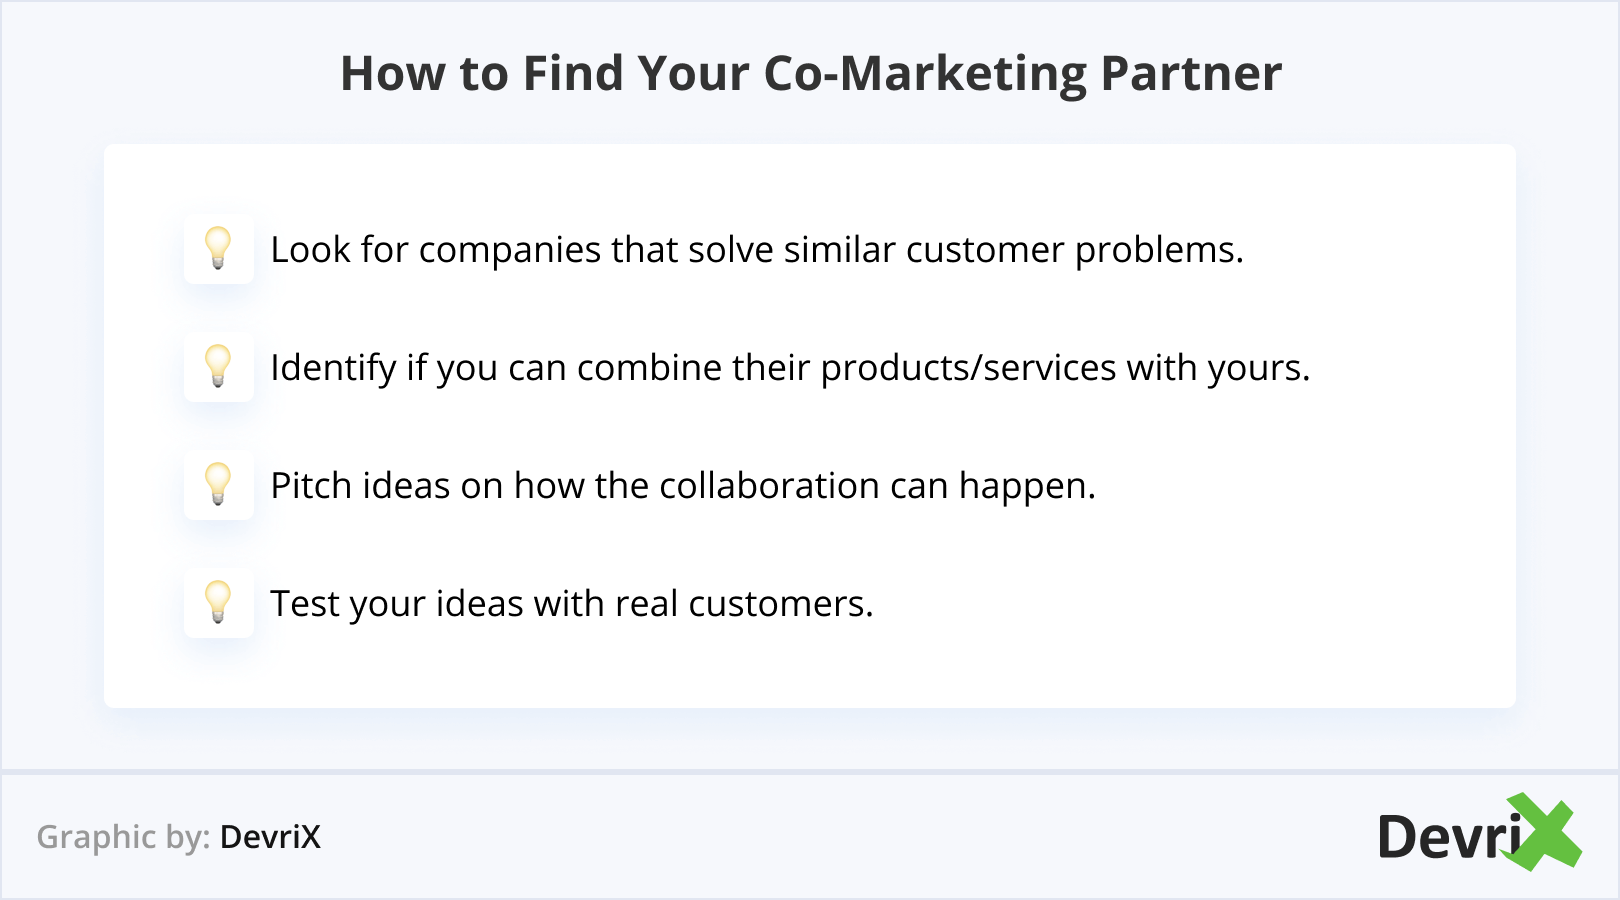 How to Find Your Co-Marketing Partner